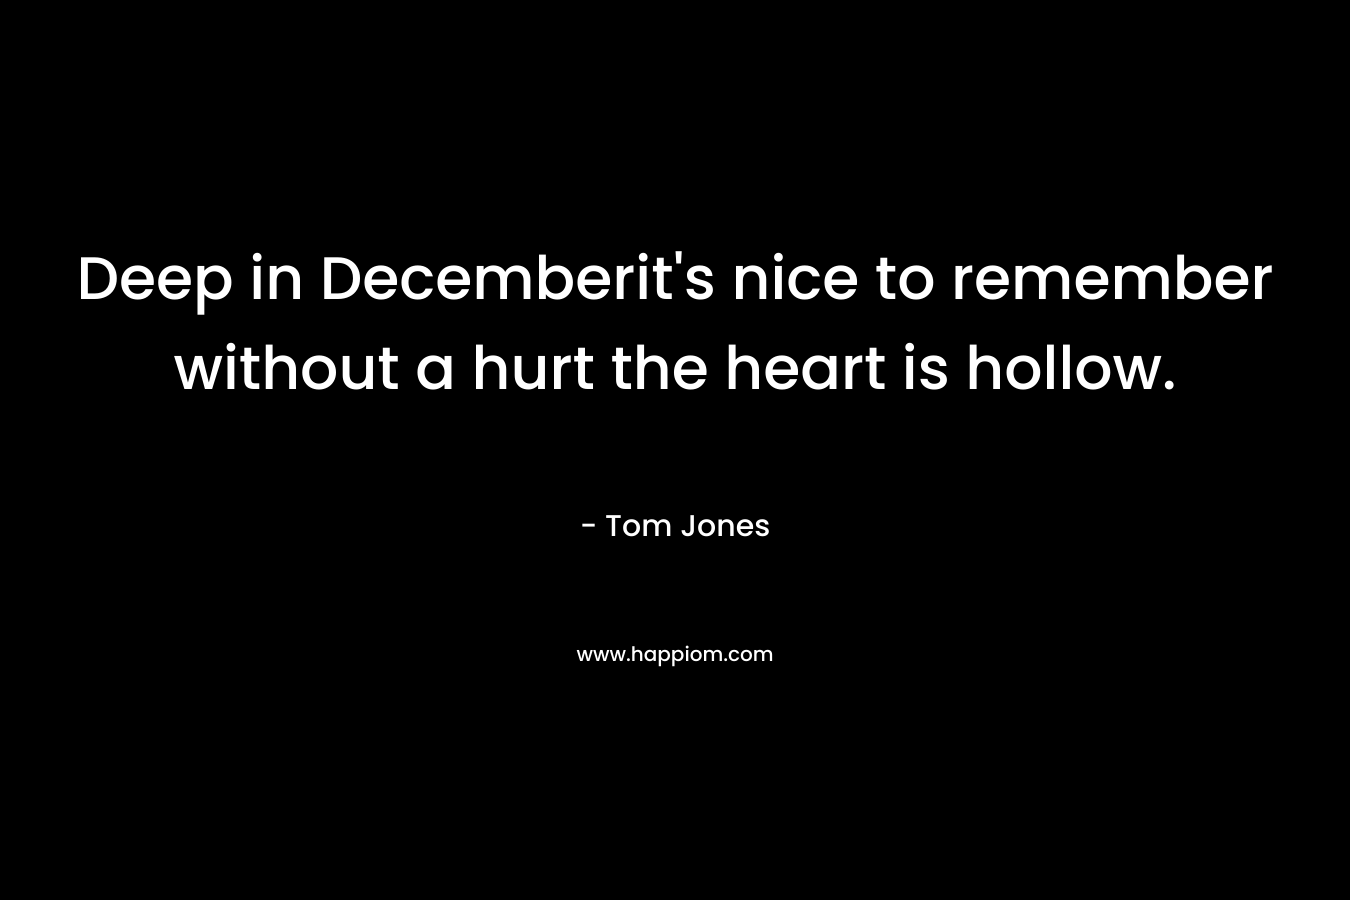 Deep in Decemberit's nice to remember without a hurt the heart is hollow.